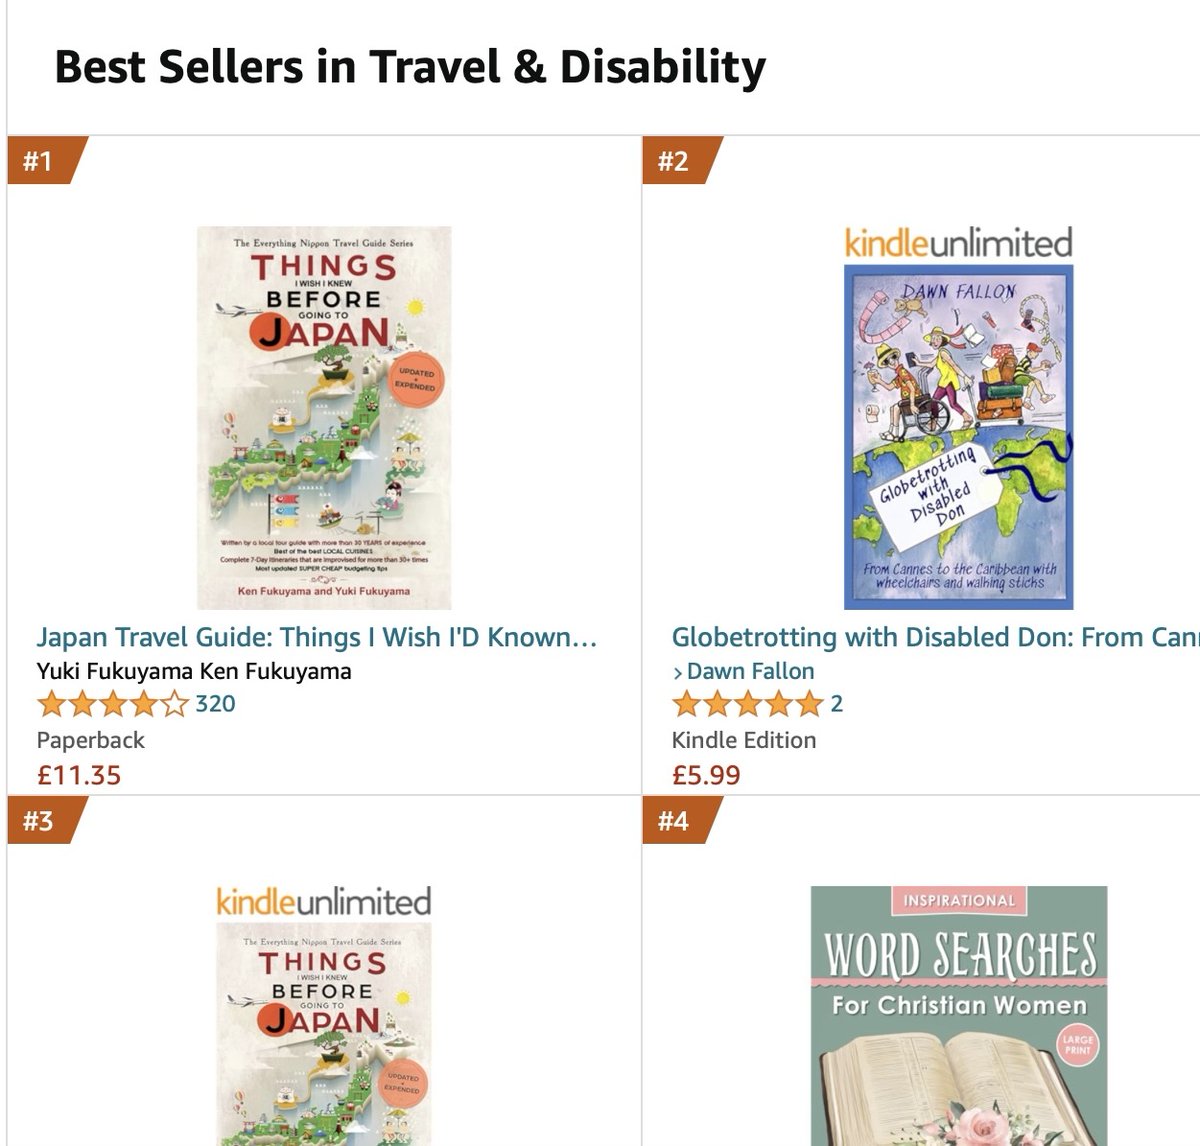 Well am delighted to be #2 Best Seller in Travel & Disability; that is a surprise! #indieauthors
#memoirwriting
#disabledcruising
#disabledtravel
#spinabifida
#cruising
#wheelchairtravel
#france
#switzerland
#austria
#disability
#caribbean
#handcycling
#humour
#DisabilityTwitter